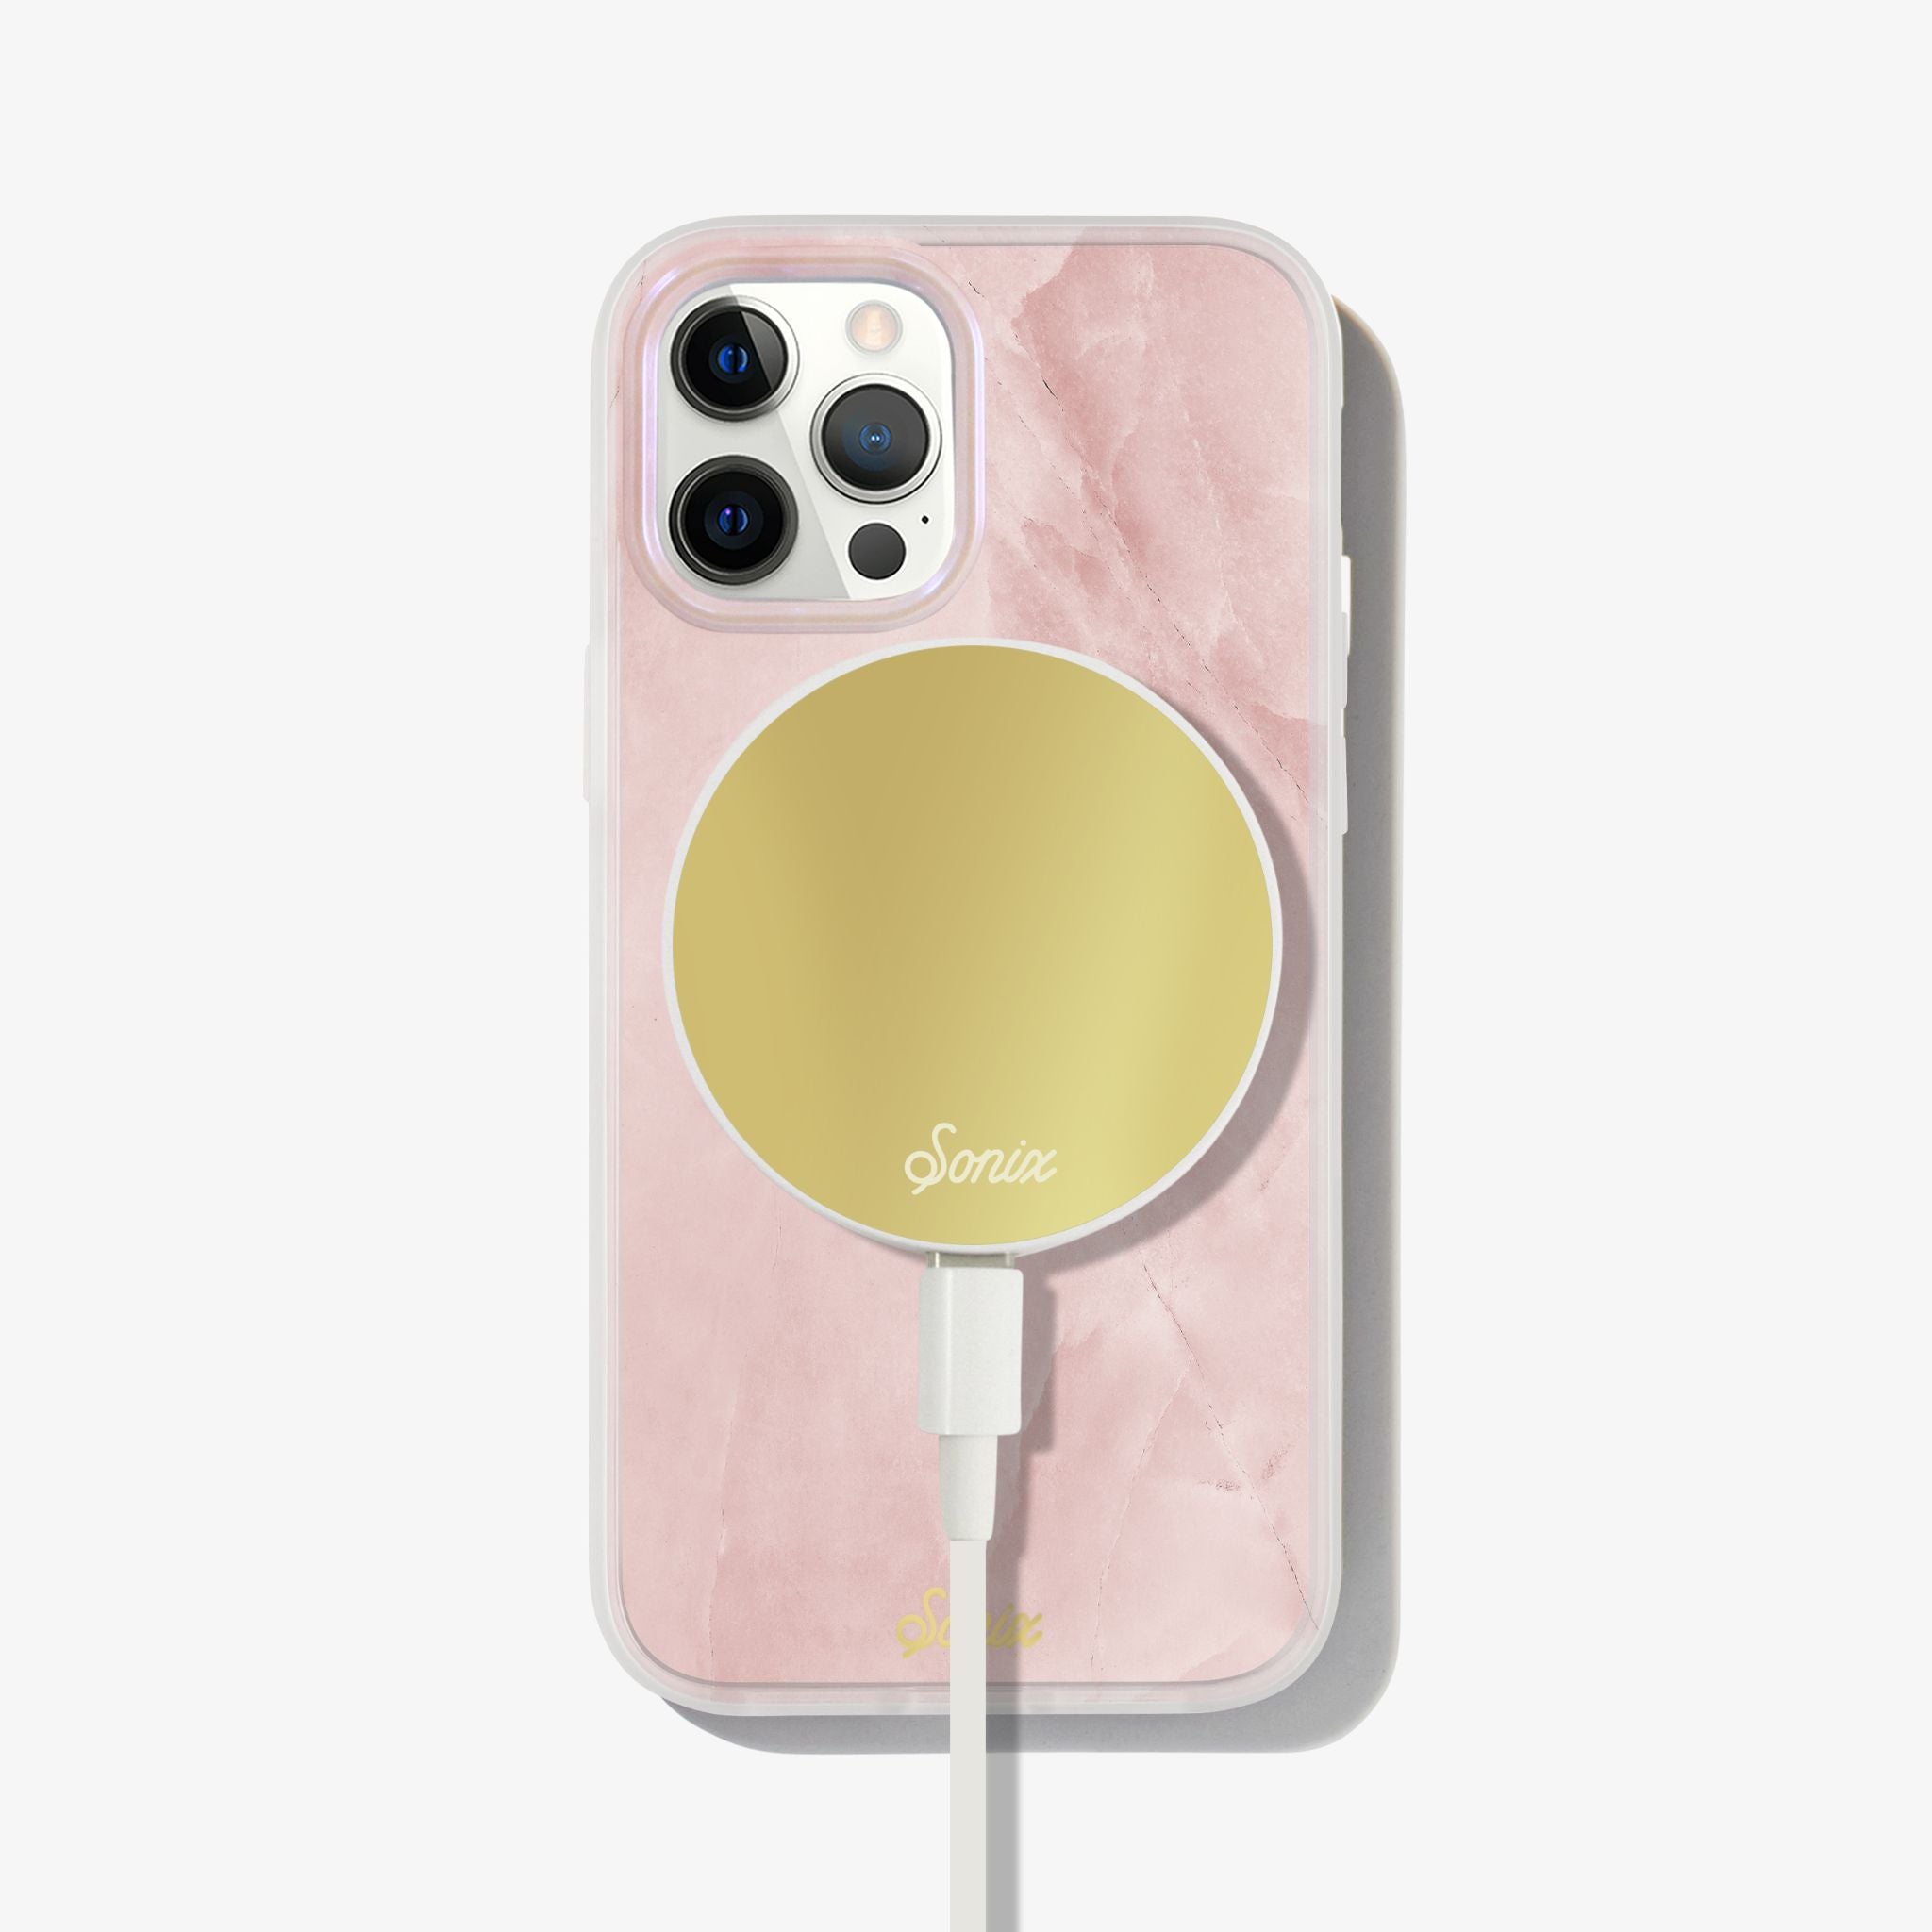 a gleaming pearl design with a pink finish shown on an iphone 12 with a gold maglink charger on the back 